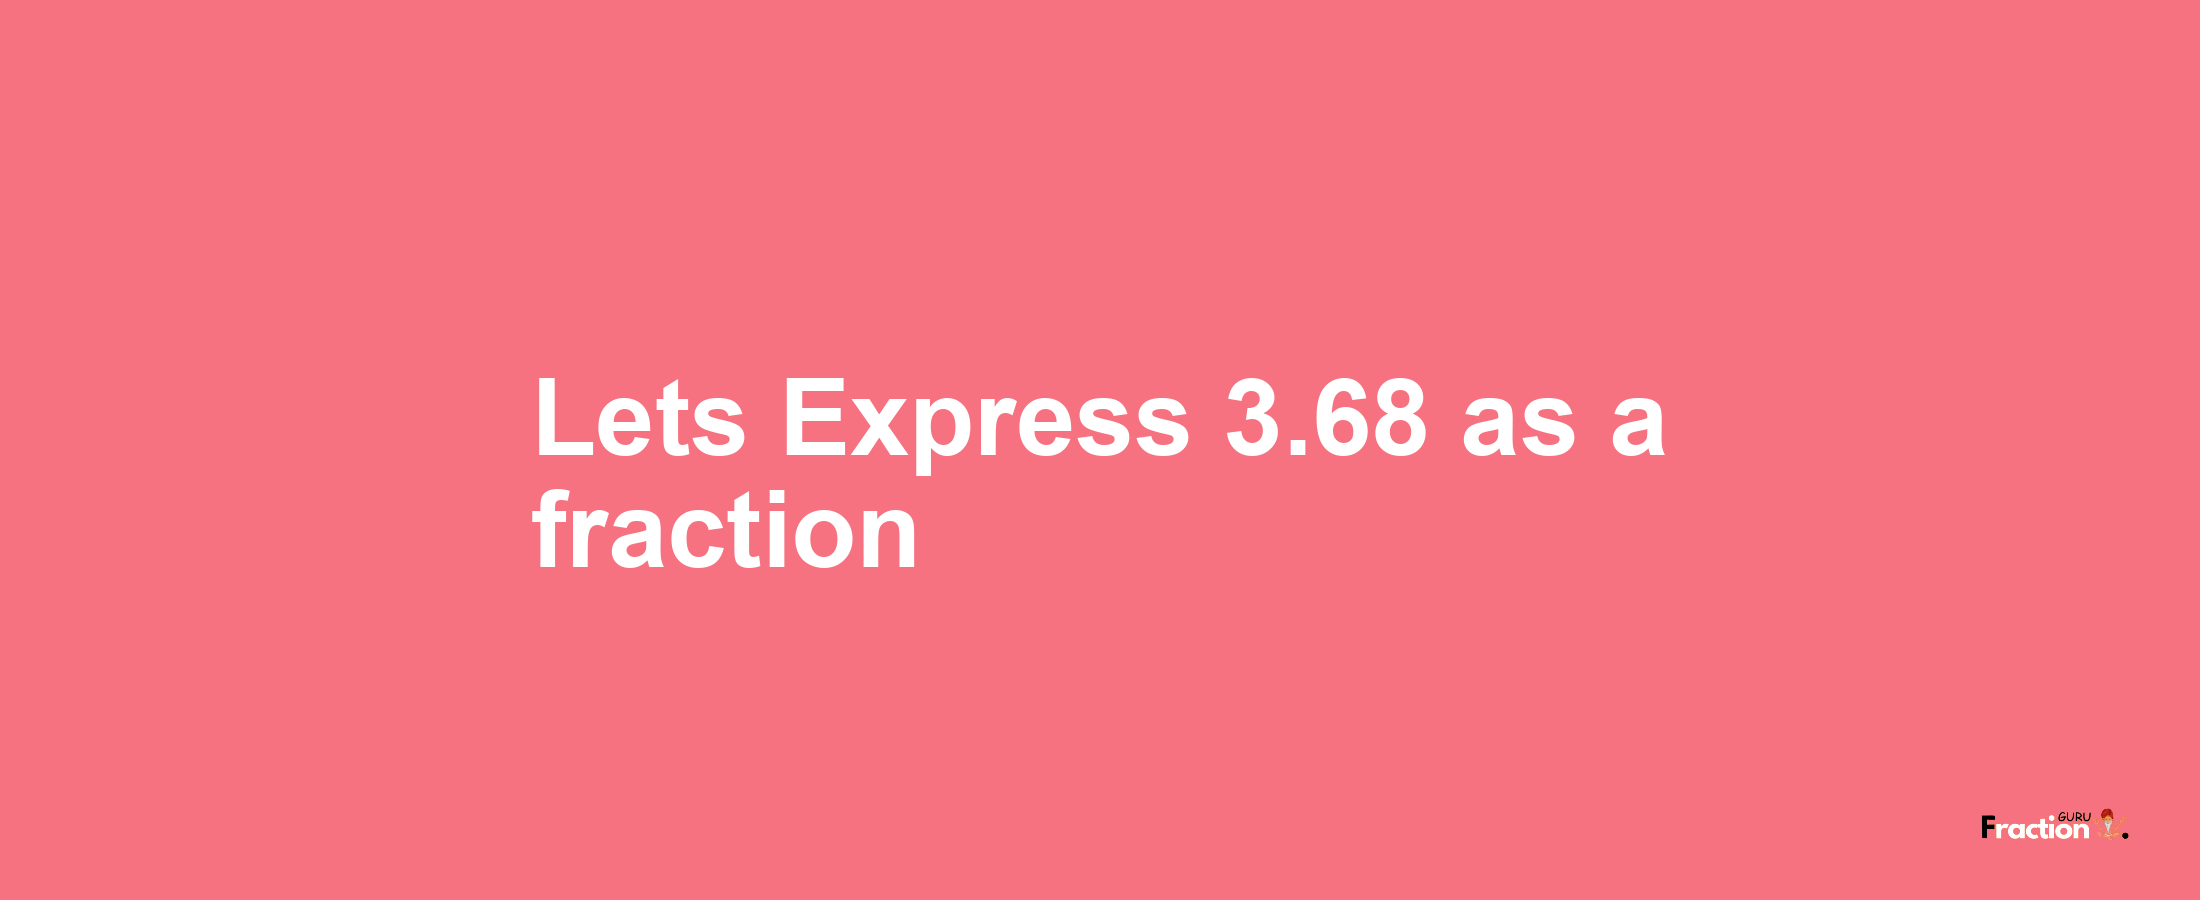 Lets Express 3.68 as afraction